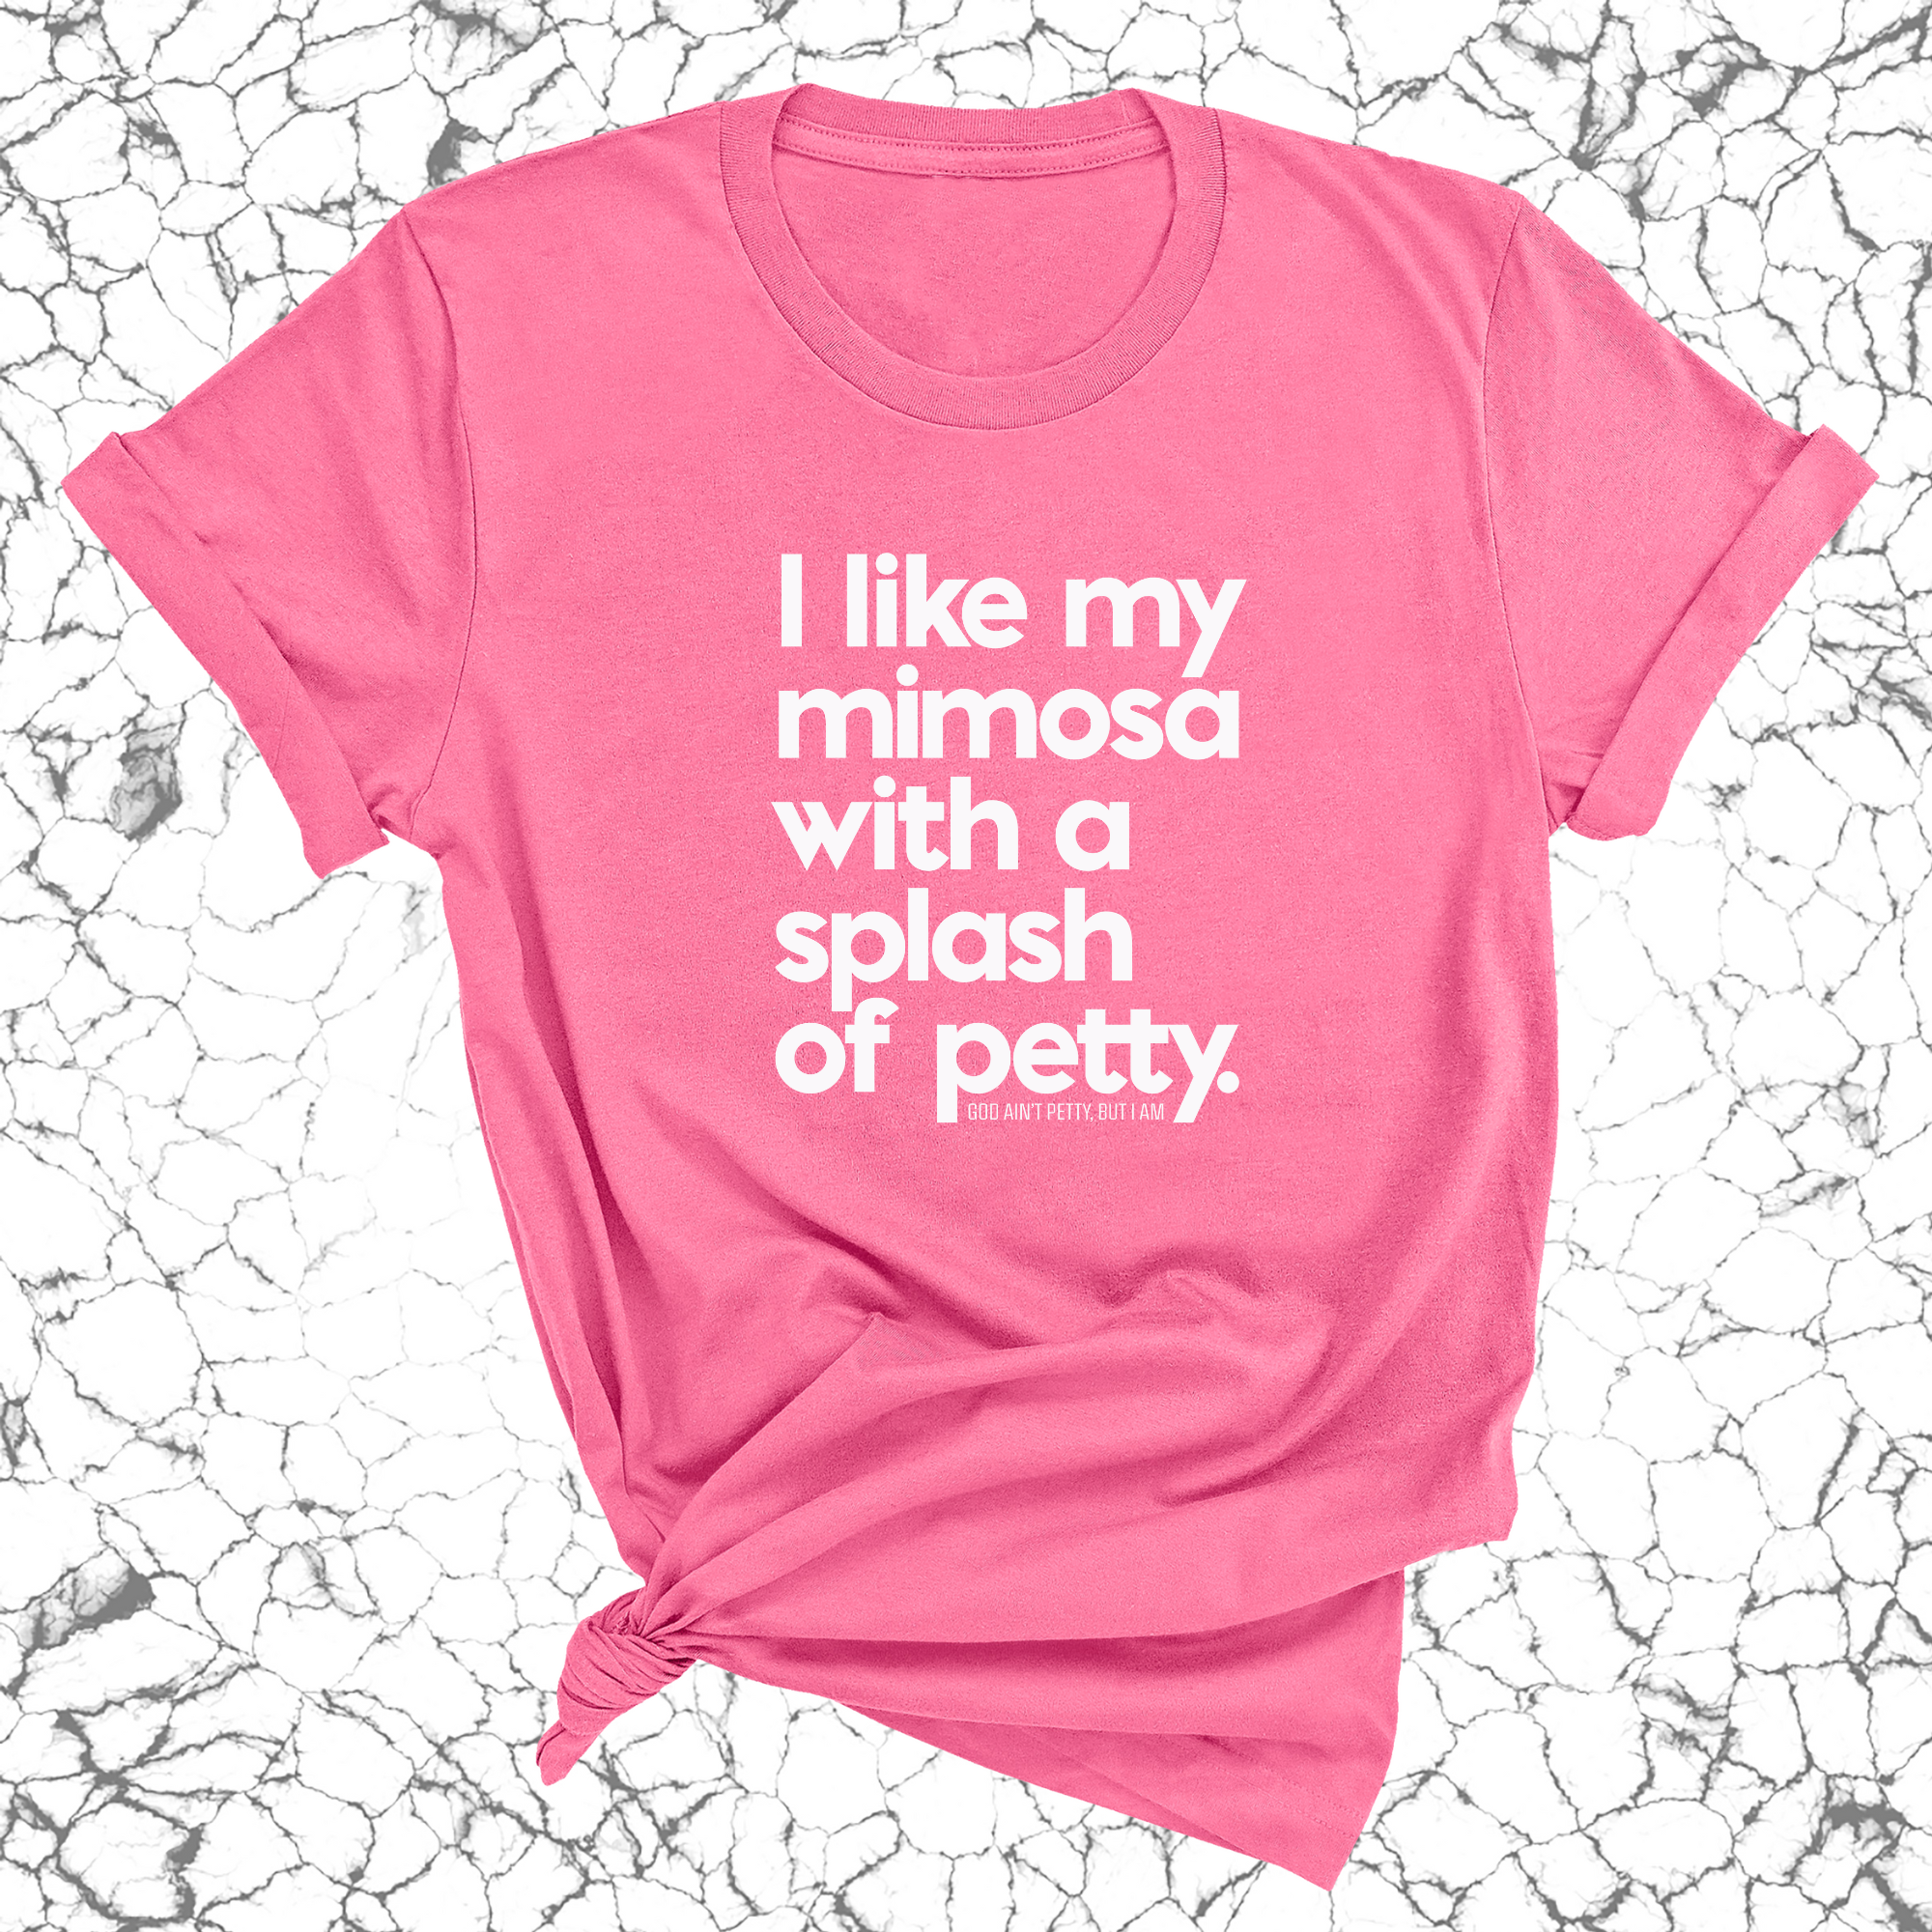 I like my mimosa with a splash of petty Unisex Tee-T-Shirt-The Original God Ain't Petty But I Am